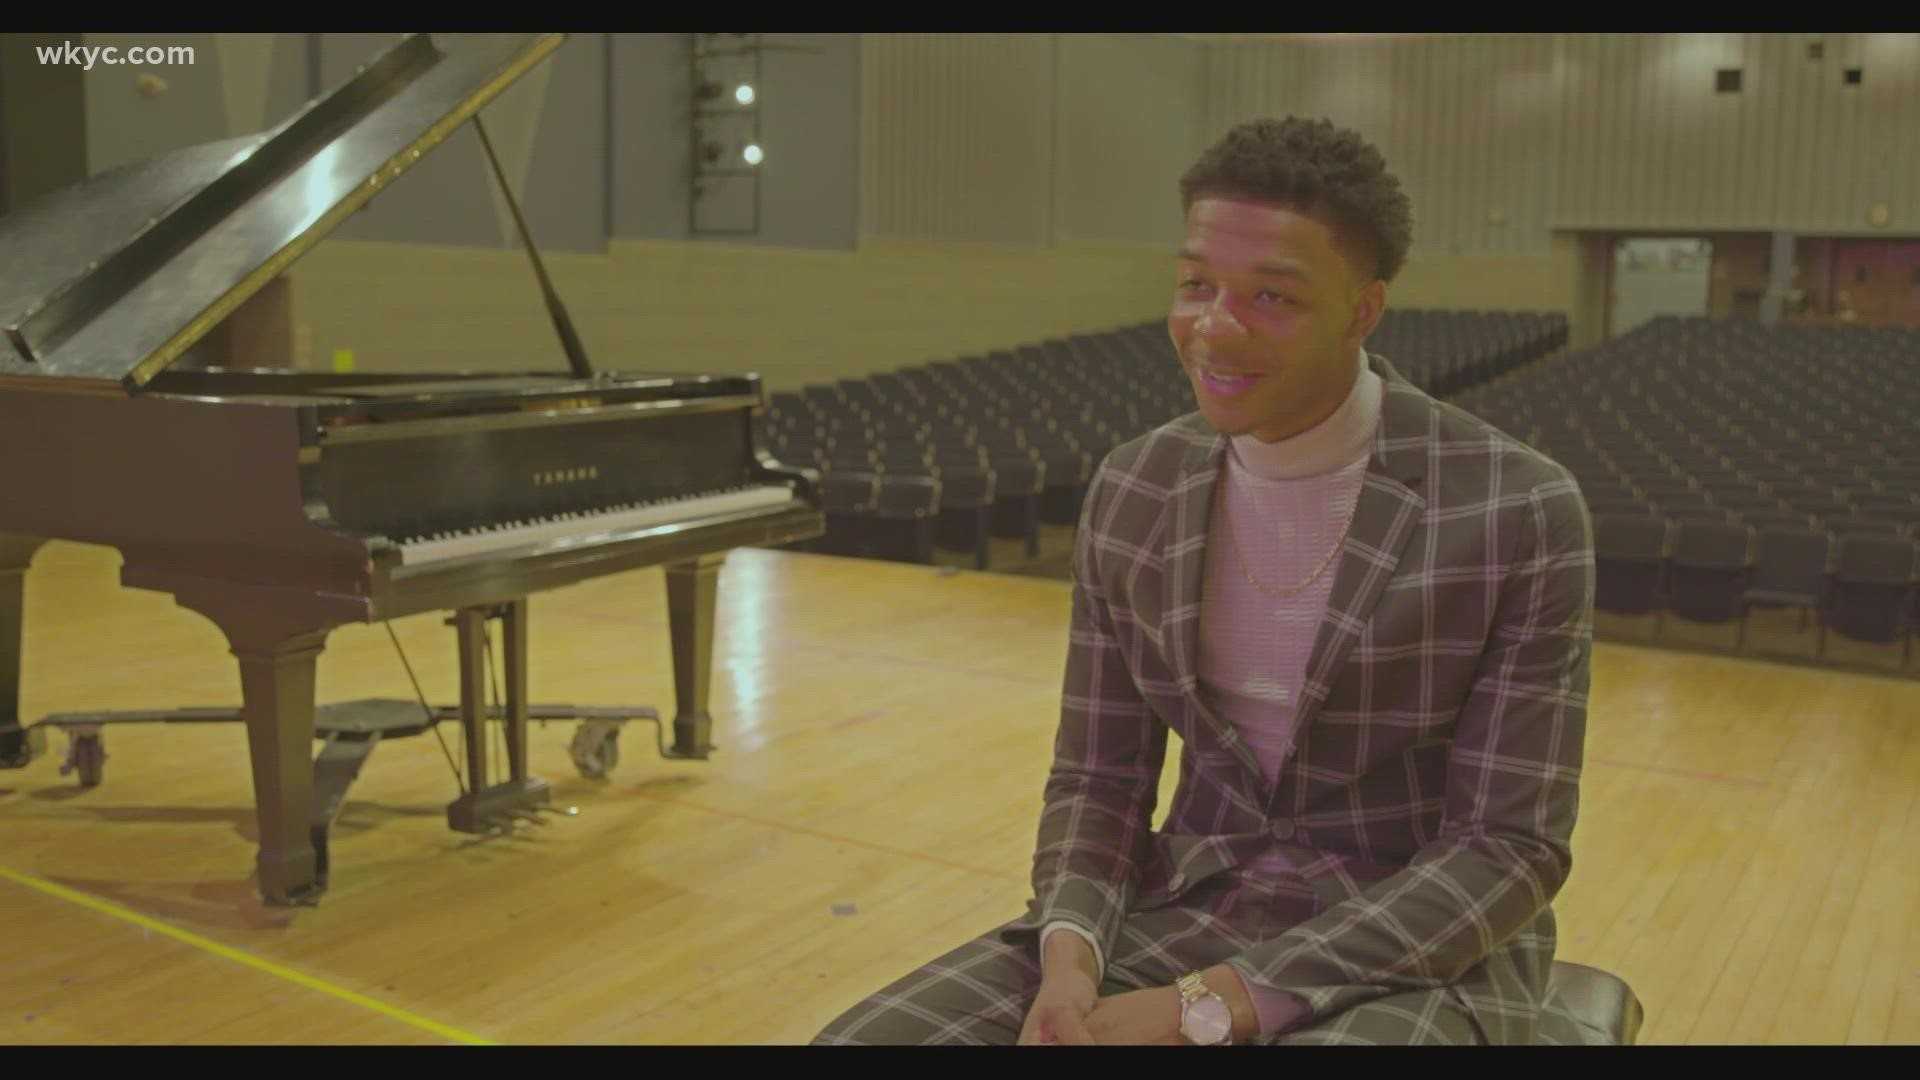 At just 22 years old, the Akron native is already poised for national success. He's currently competing on the famed Apollo Theater's "Amateur Night at the Apollo."